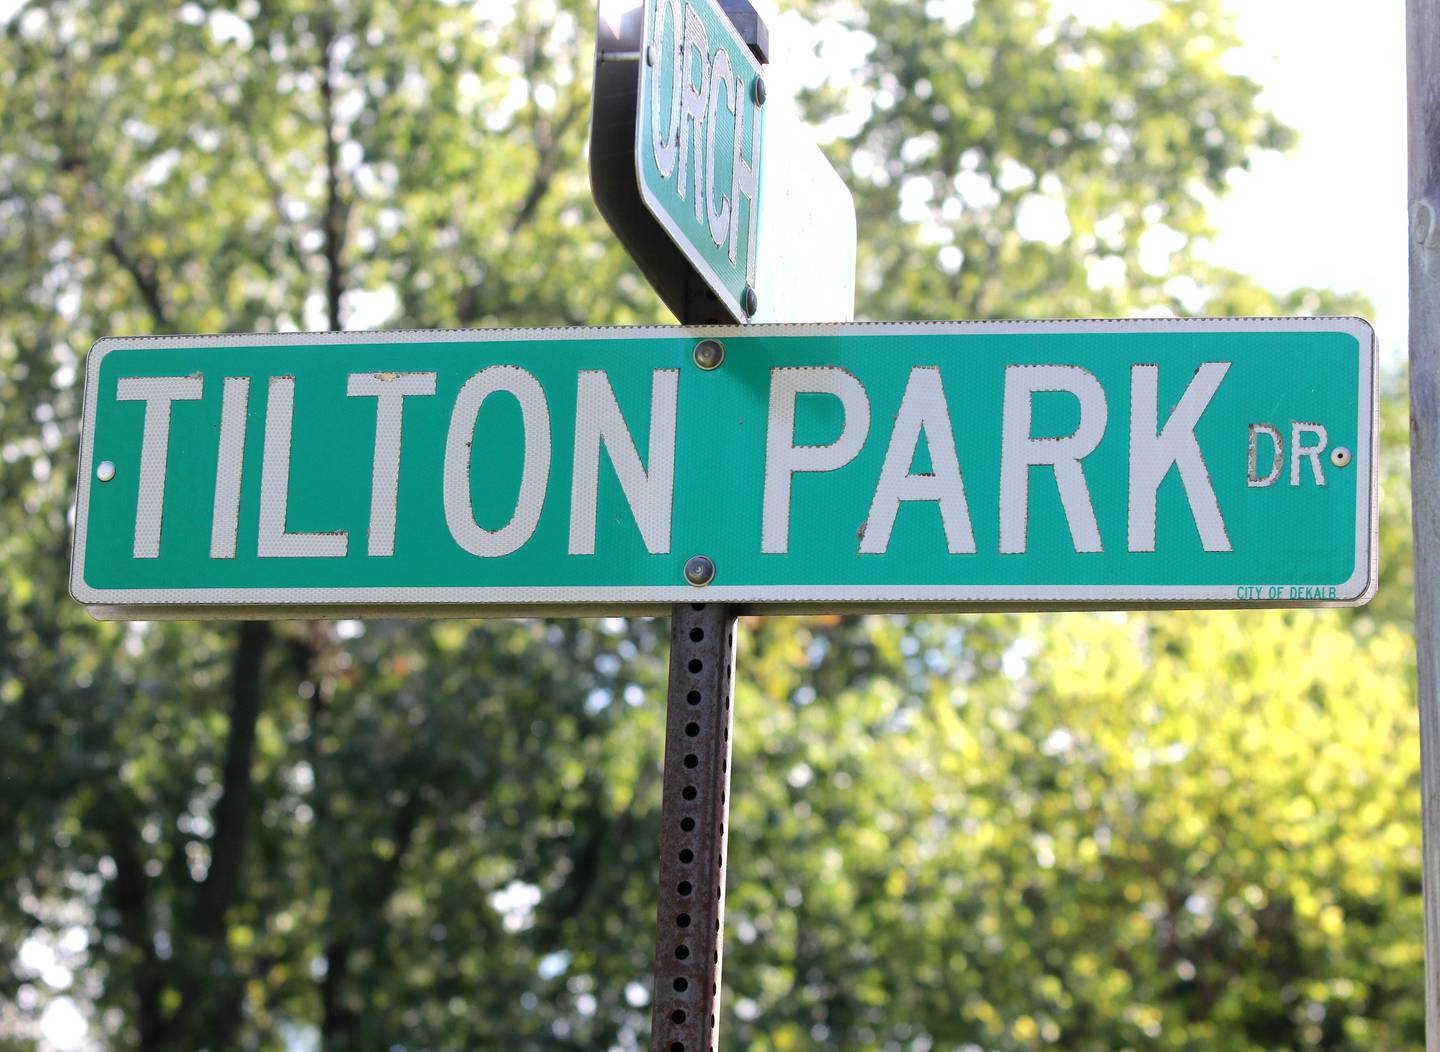 Tilton Park Drive in DeKalb where a police involved shooting took place Monday, Oct. 25, 2021.